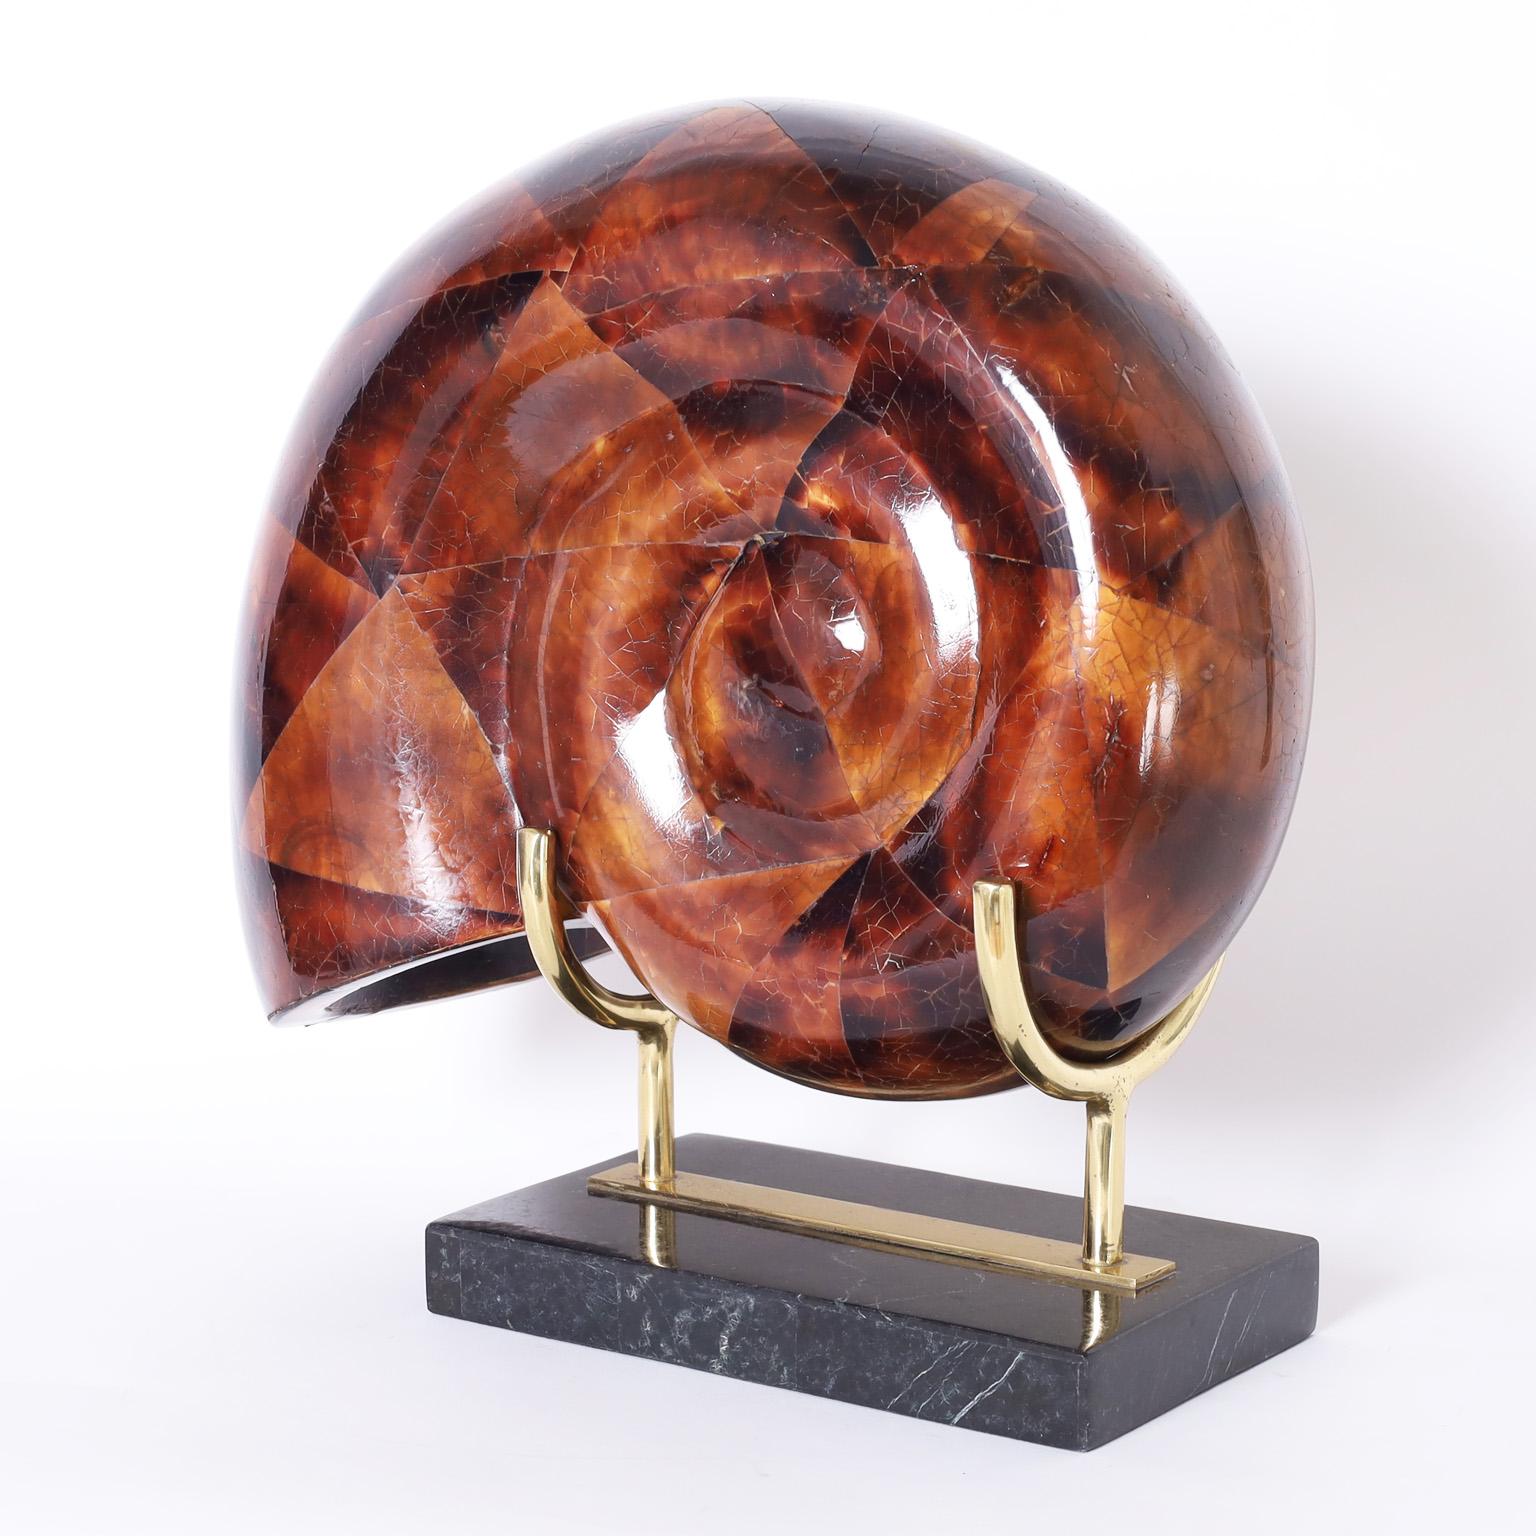 Philippine Mid-Century Tessellated Penshell Nautilus on Stand by Maitland-Smith For Sale